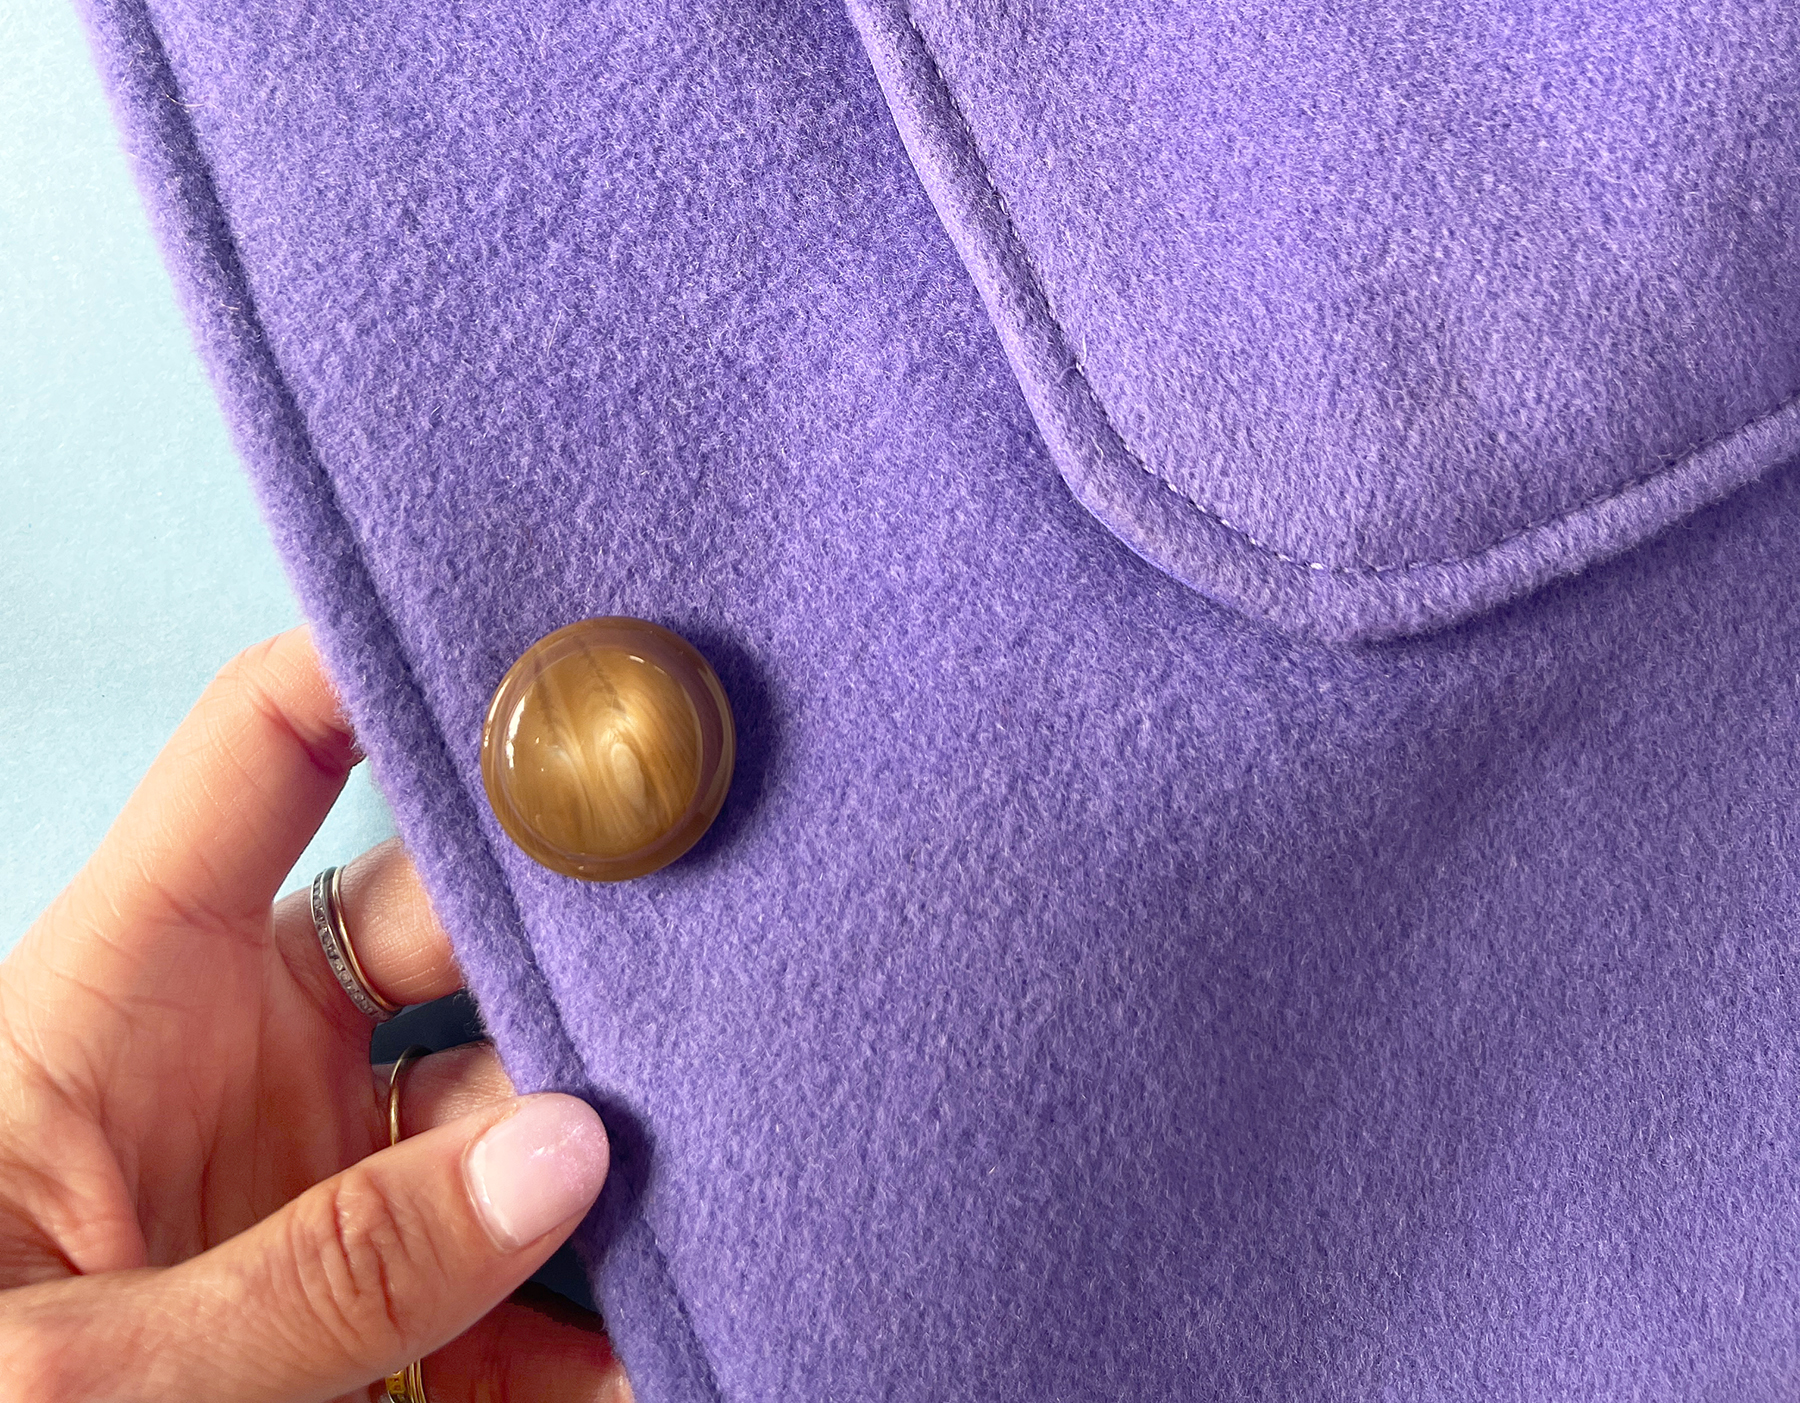 Detail shot of purple wool coating fabric, featuring top stitching and a large brown button.